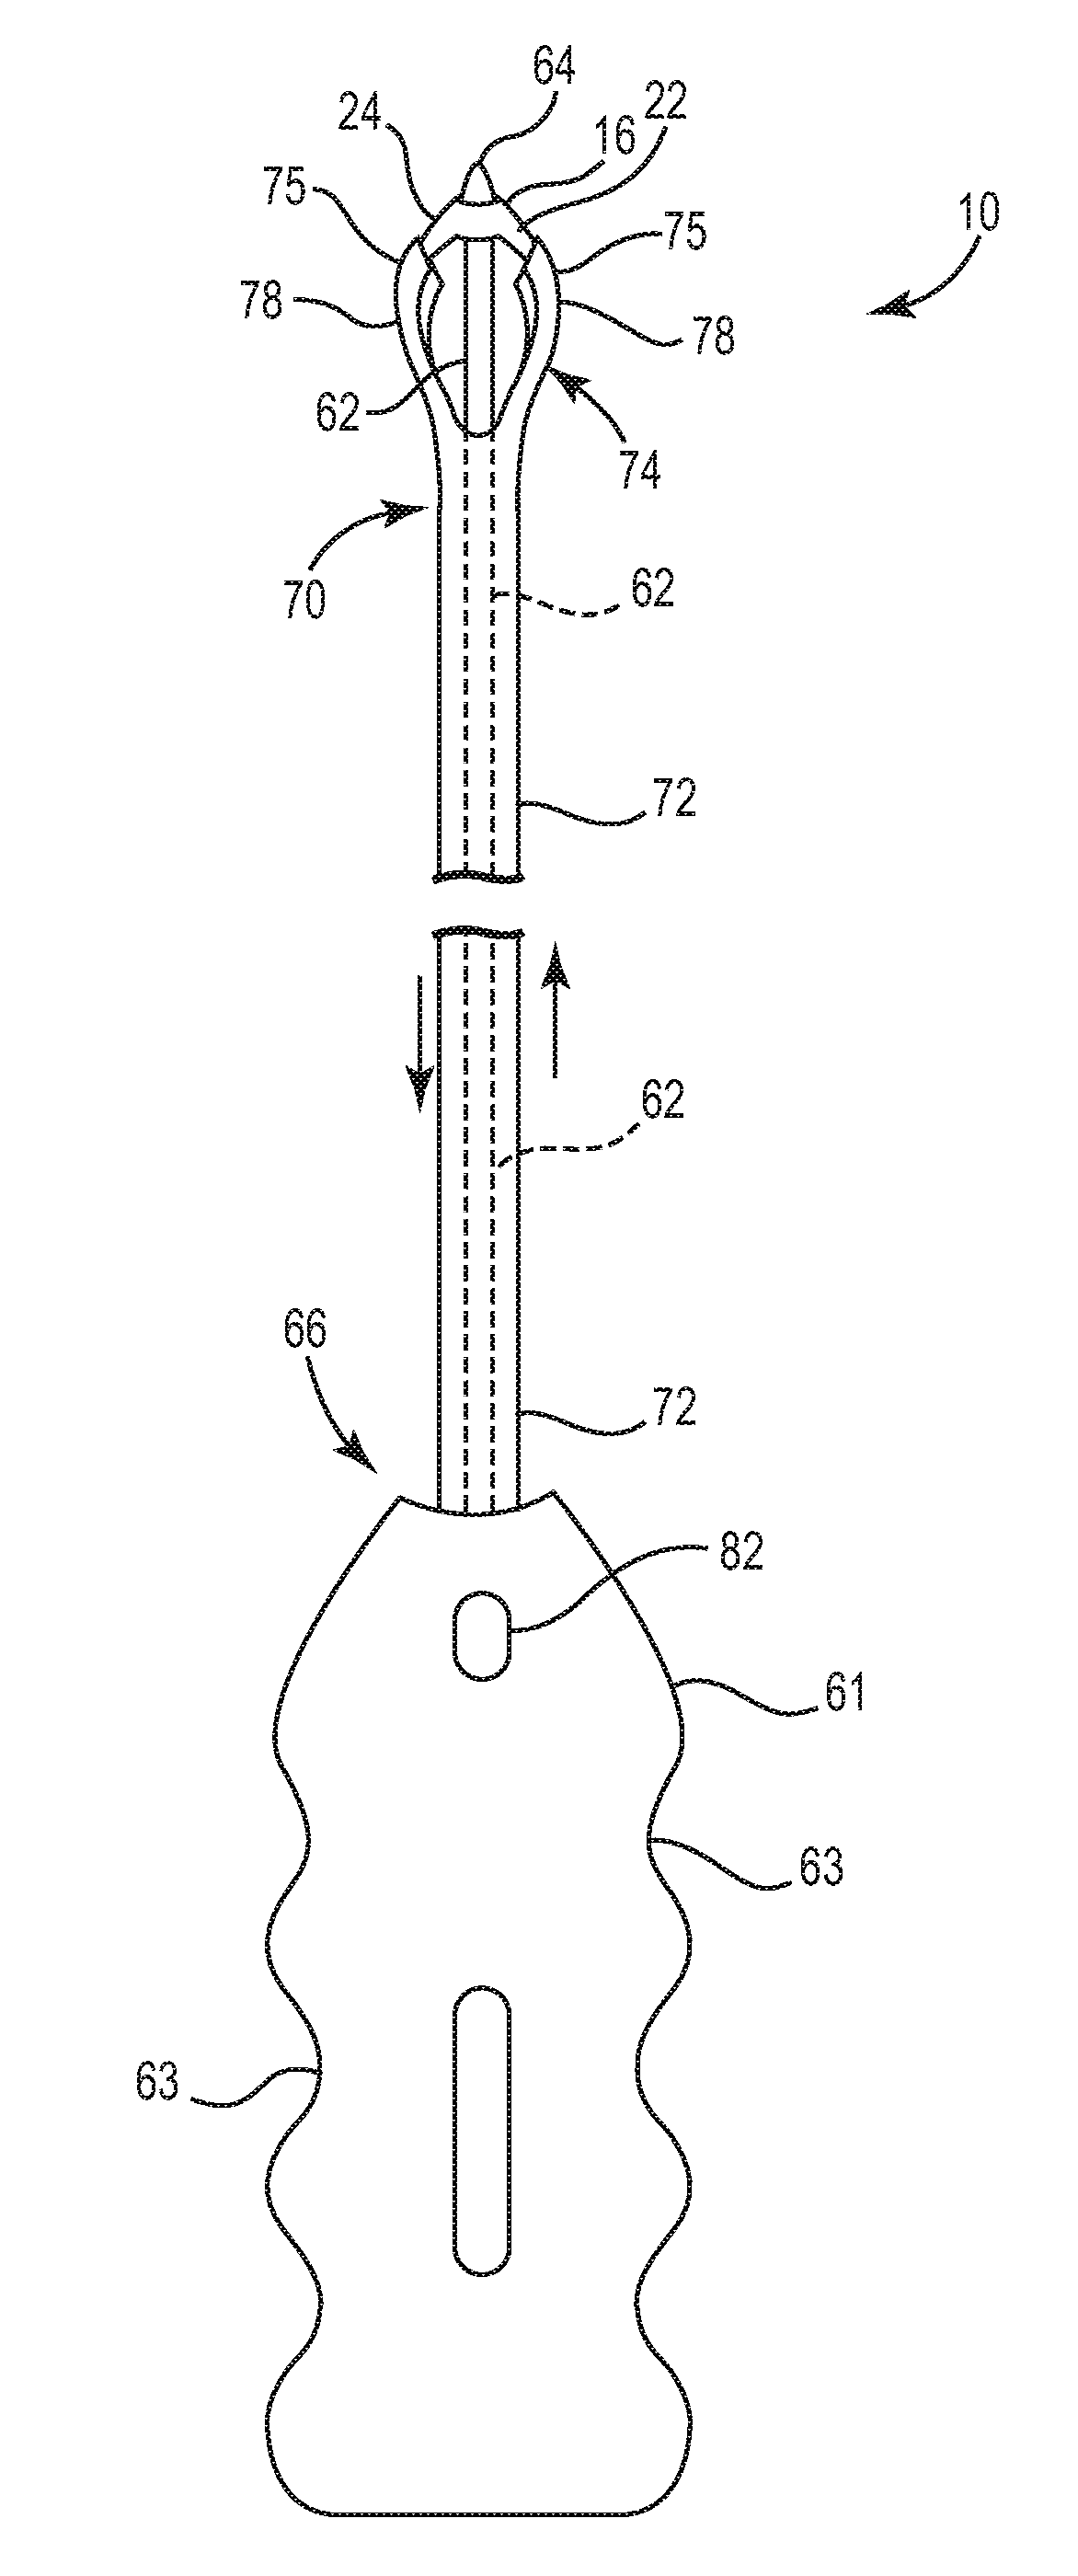 Pelvic implant and delivery system